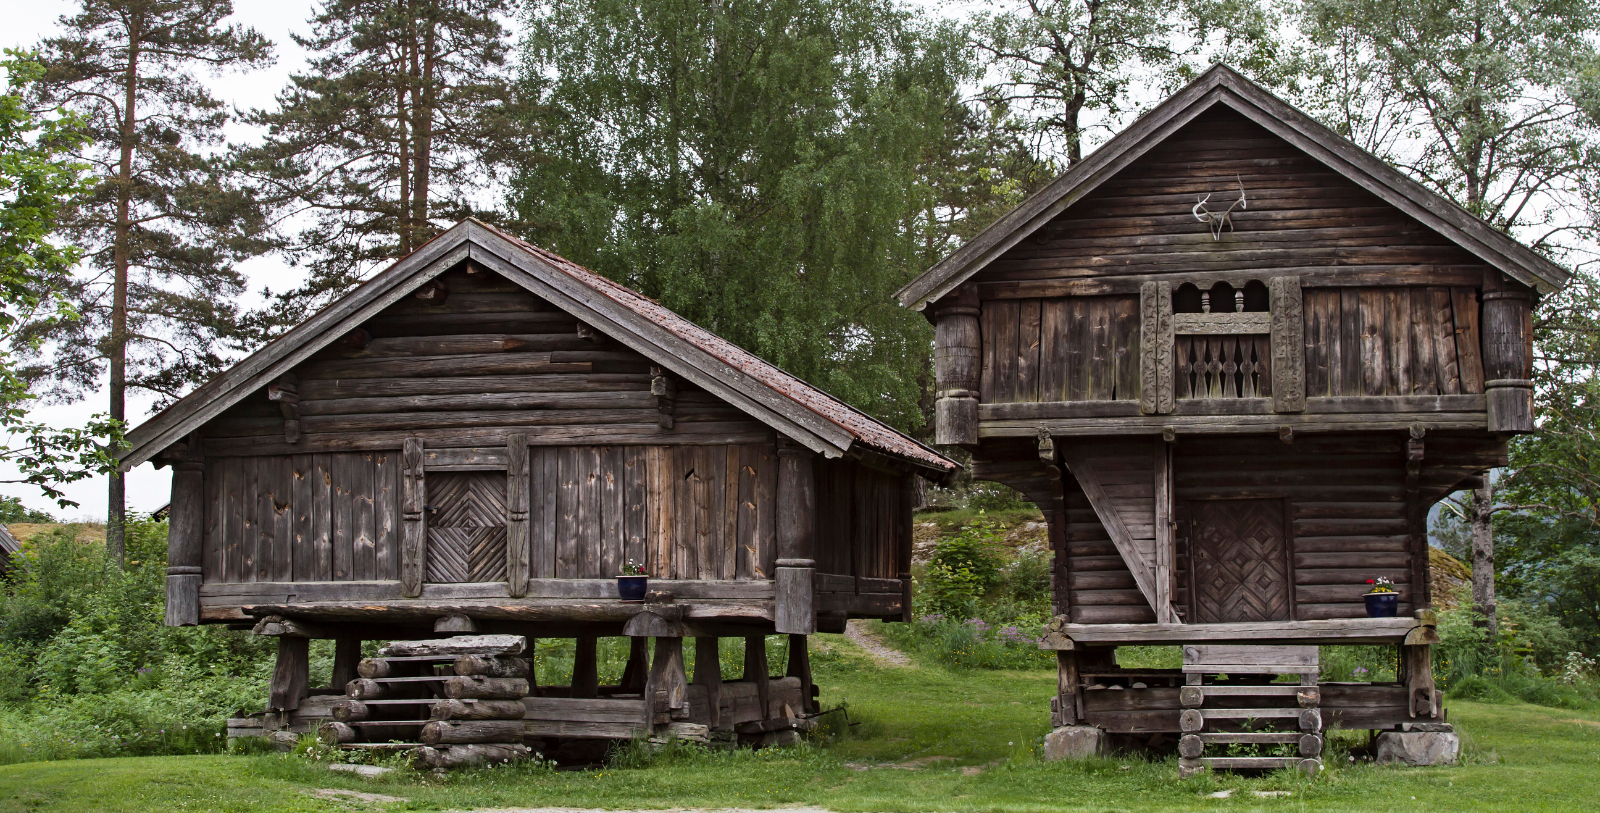 Uncover the wild alpine landscapes and rich cultural traditions of Upper Telemark, a historic district with stunning vistas and roots in the Viking Age.